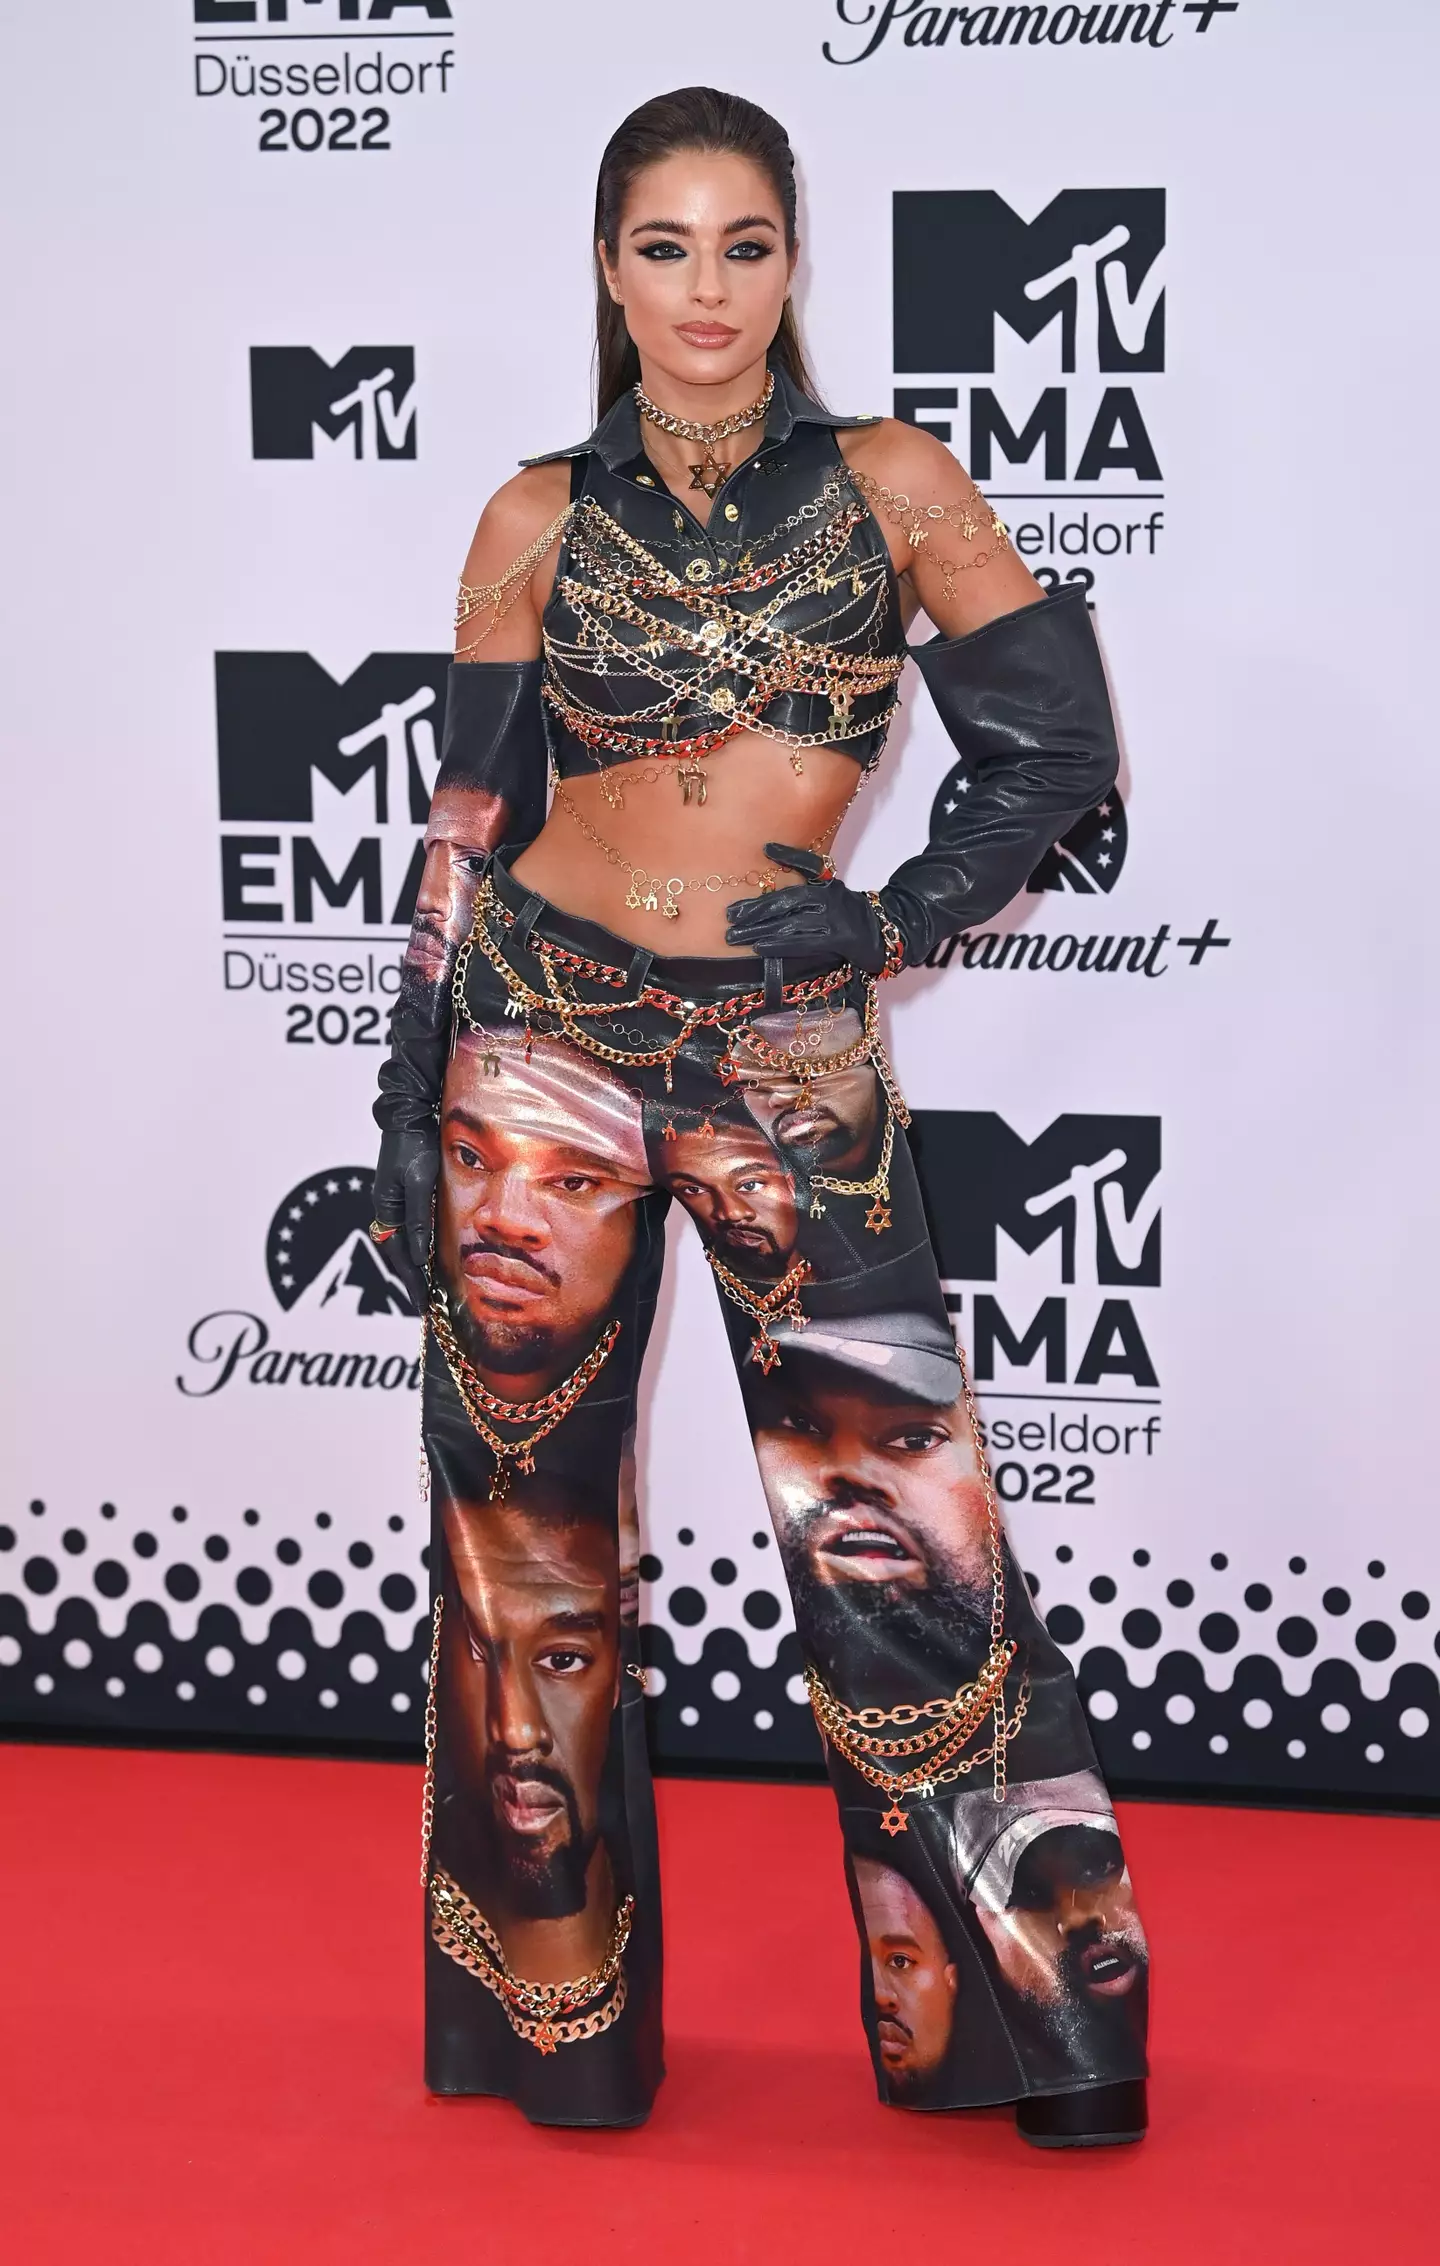 Noa Kirel's full outfit for the EMAs.